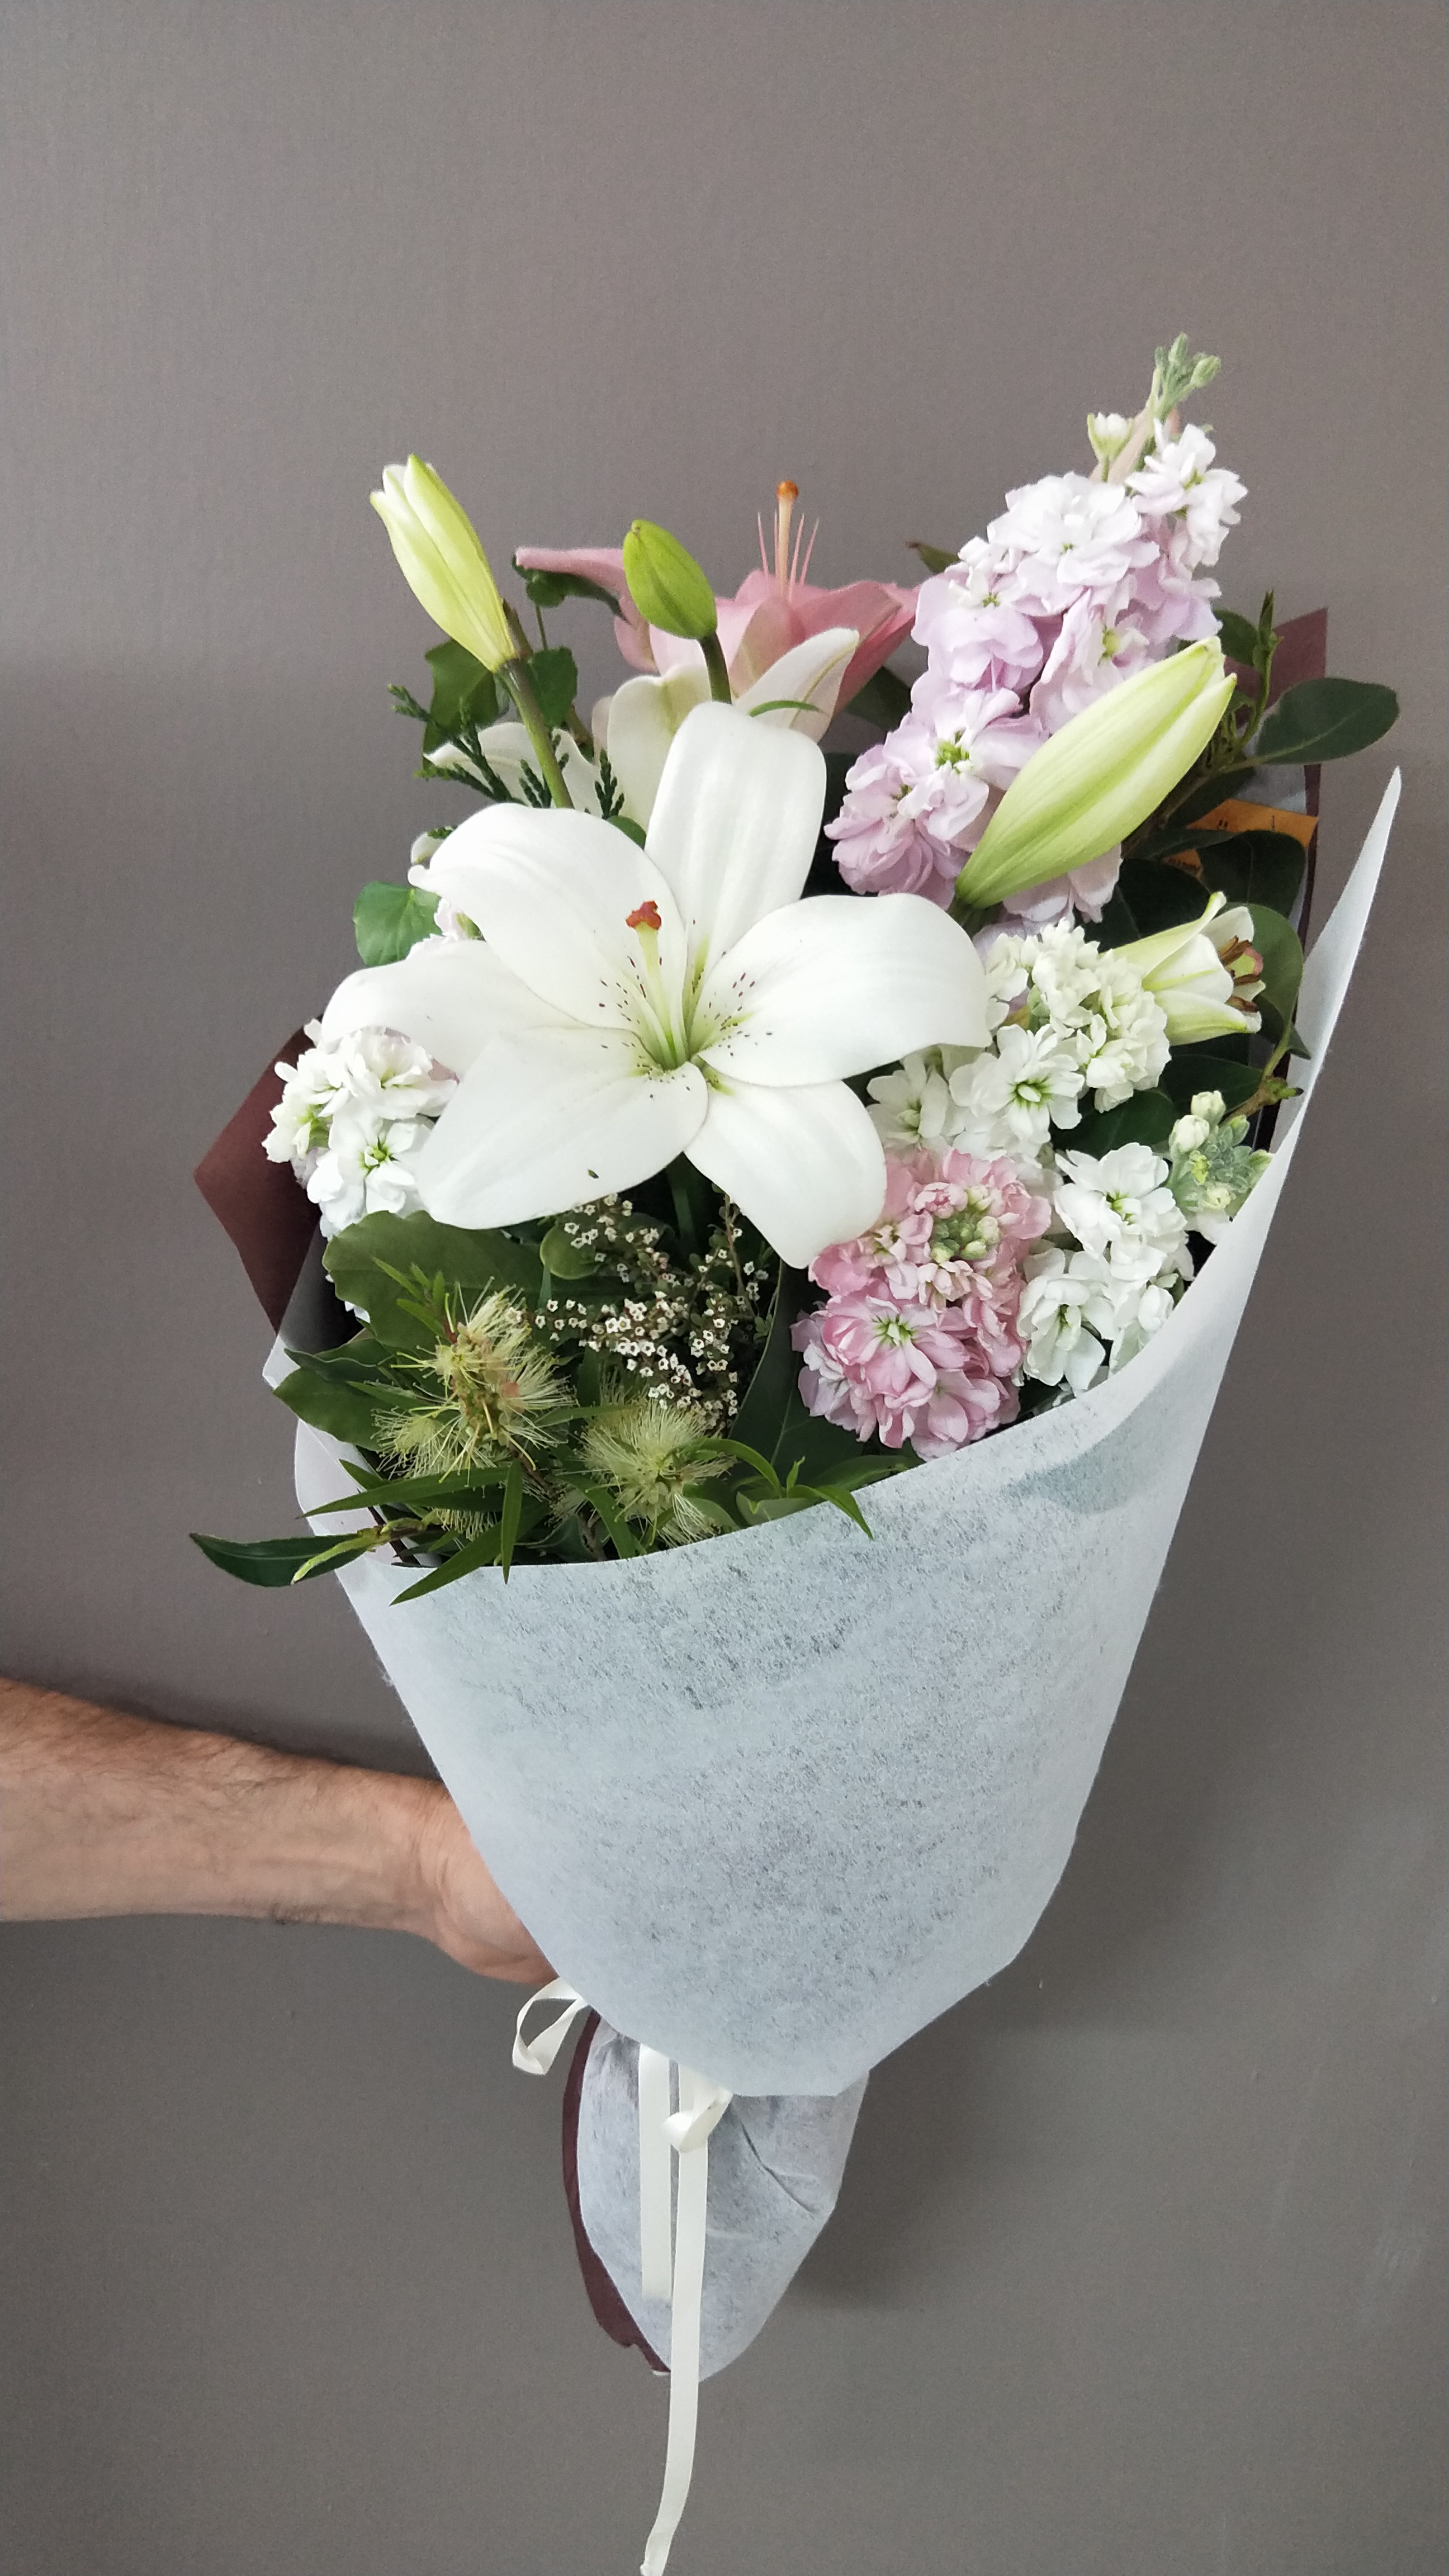 Floral cone bouquet makes the perfect gift for any occasion.